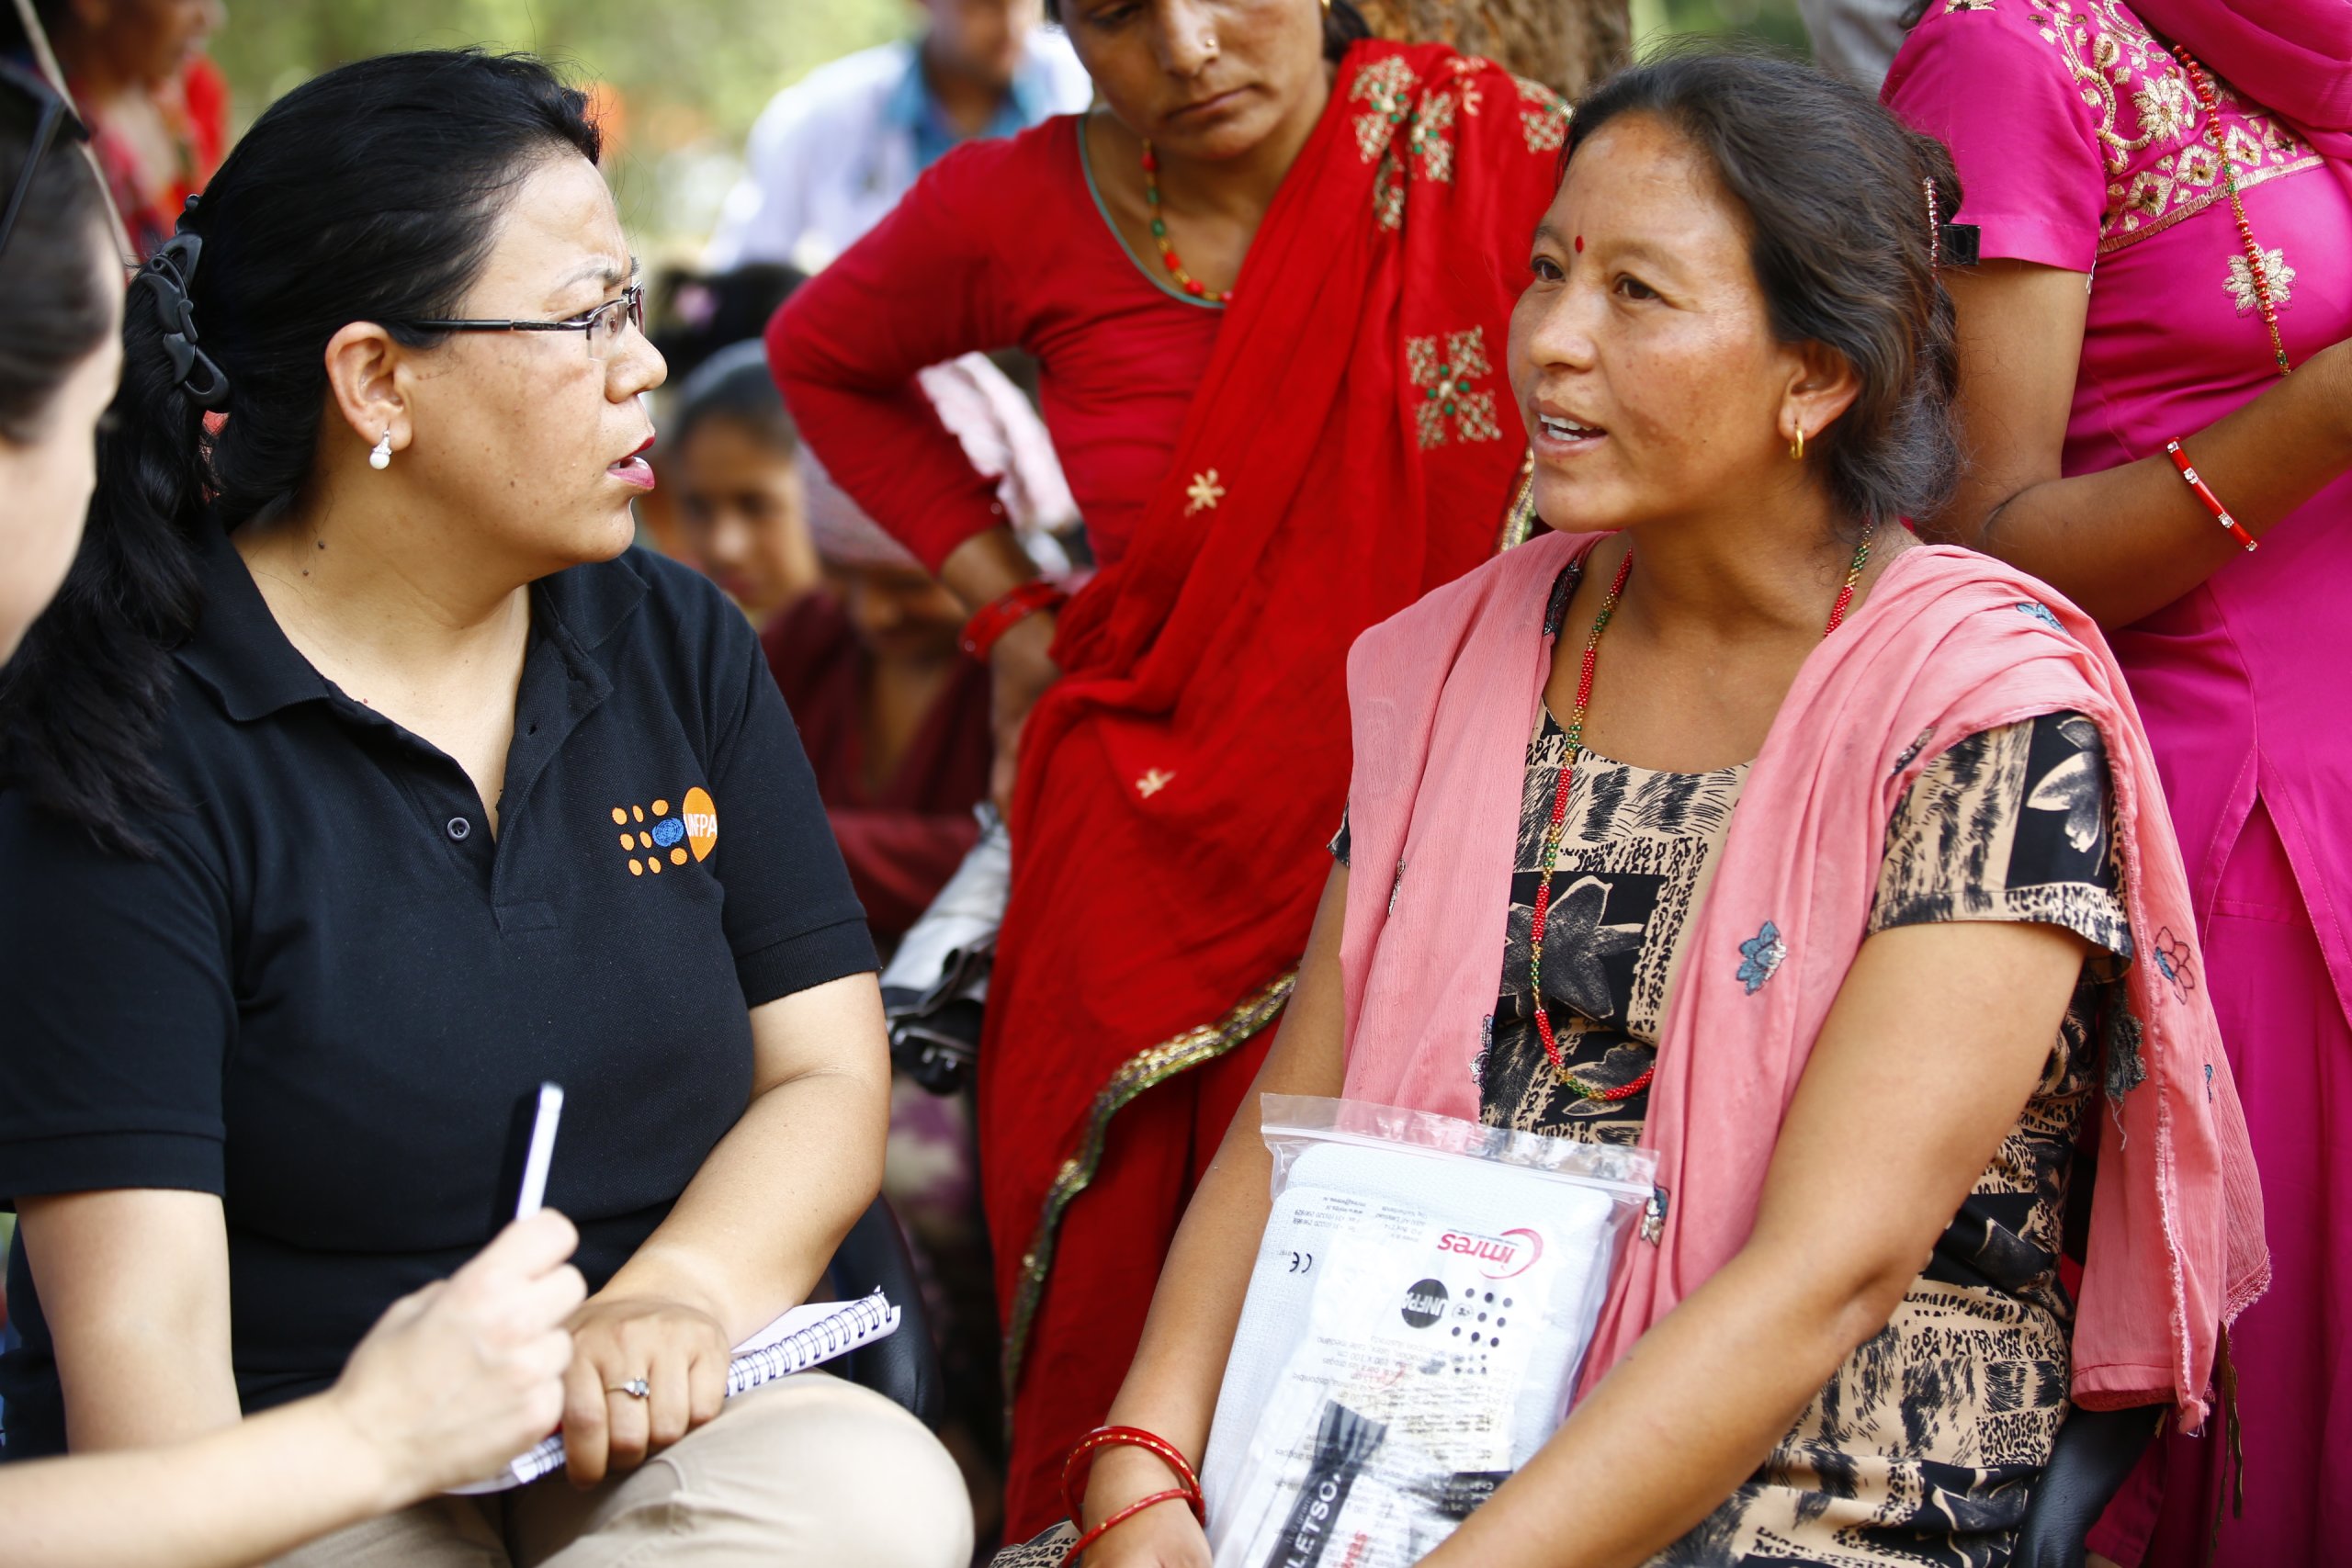 https://www.usaforunfpa.org/wp-content/uploads/2017/11/A-UNFPA-staff-member-talks-with-Ishwari-Dangol-28-after-she-received-a-clean-delivery-kit.-scaled.jpg